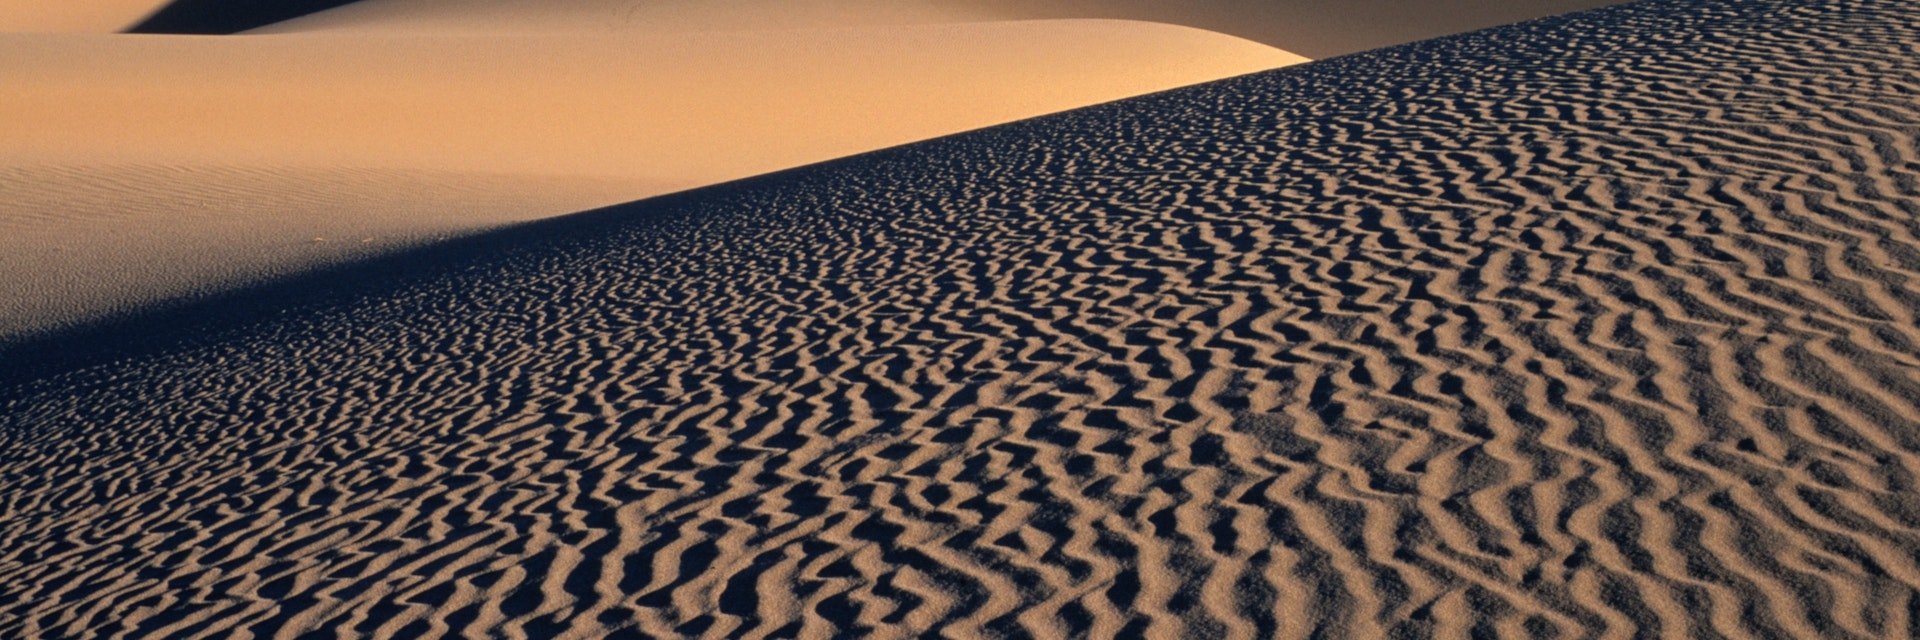 Ripples in sand at Mesquite Sand Dunes.